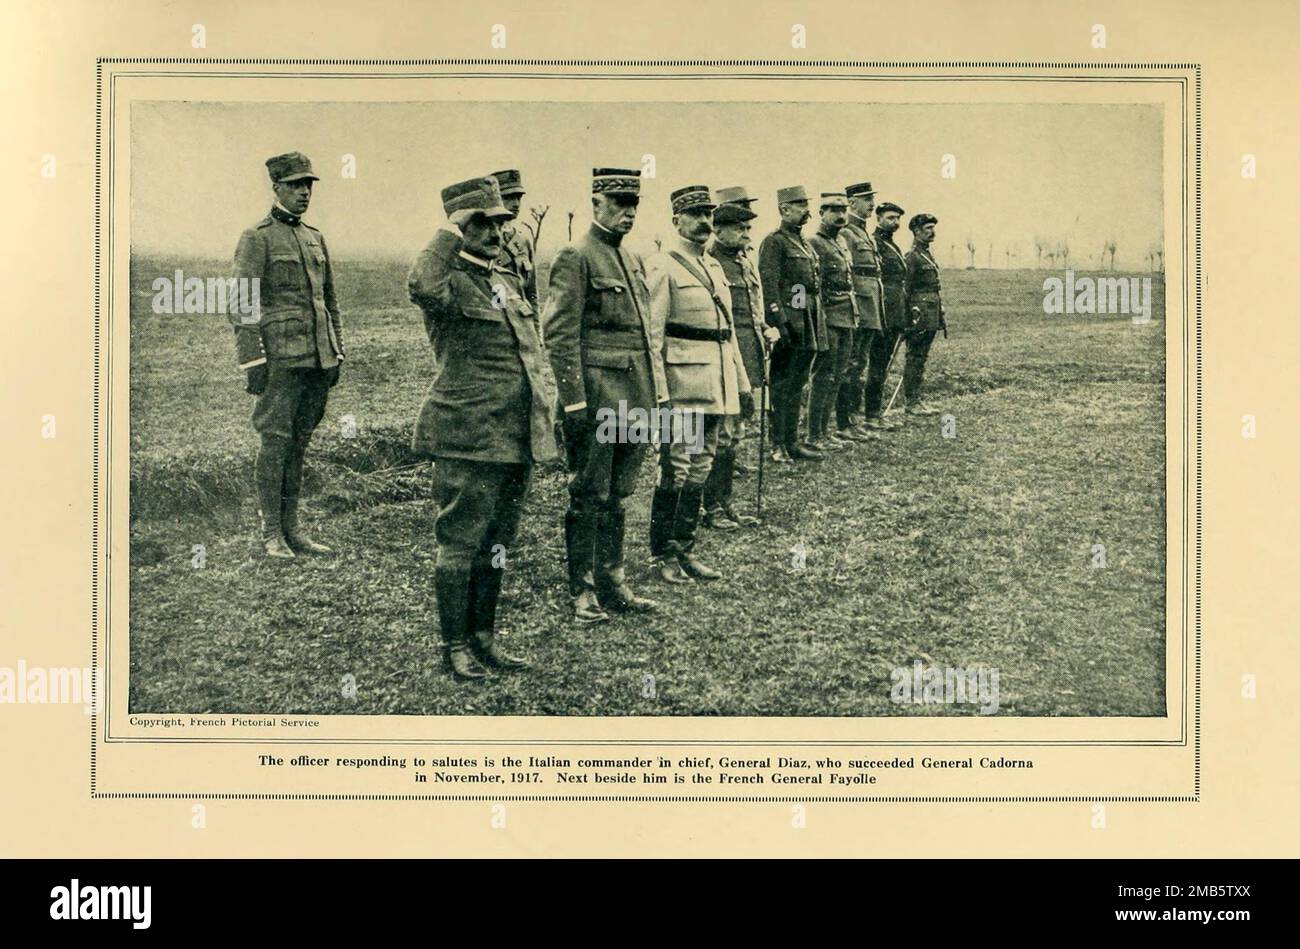 General Diaz with French and Italian Officers from the book The story of the great war; the complete historical records of events to date DIPLOMATIC AND STATE PAPERS by Reynolds, Francis Joseph, 1867-1937; Churchill, Allen Leon; Miller, Francis Trevelyan, 1877-1959; Wood, Leonard, 1860-1927; Knight, Austin Melvin, 1854-1927; Palmer, Frederick, 1873-1958; Simonds, Frank Herbert, 1878-; Ruhl, Arthur Brown, 1876-  Volume VII Published 1920 Stock Photo